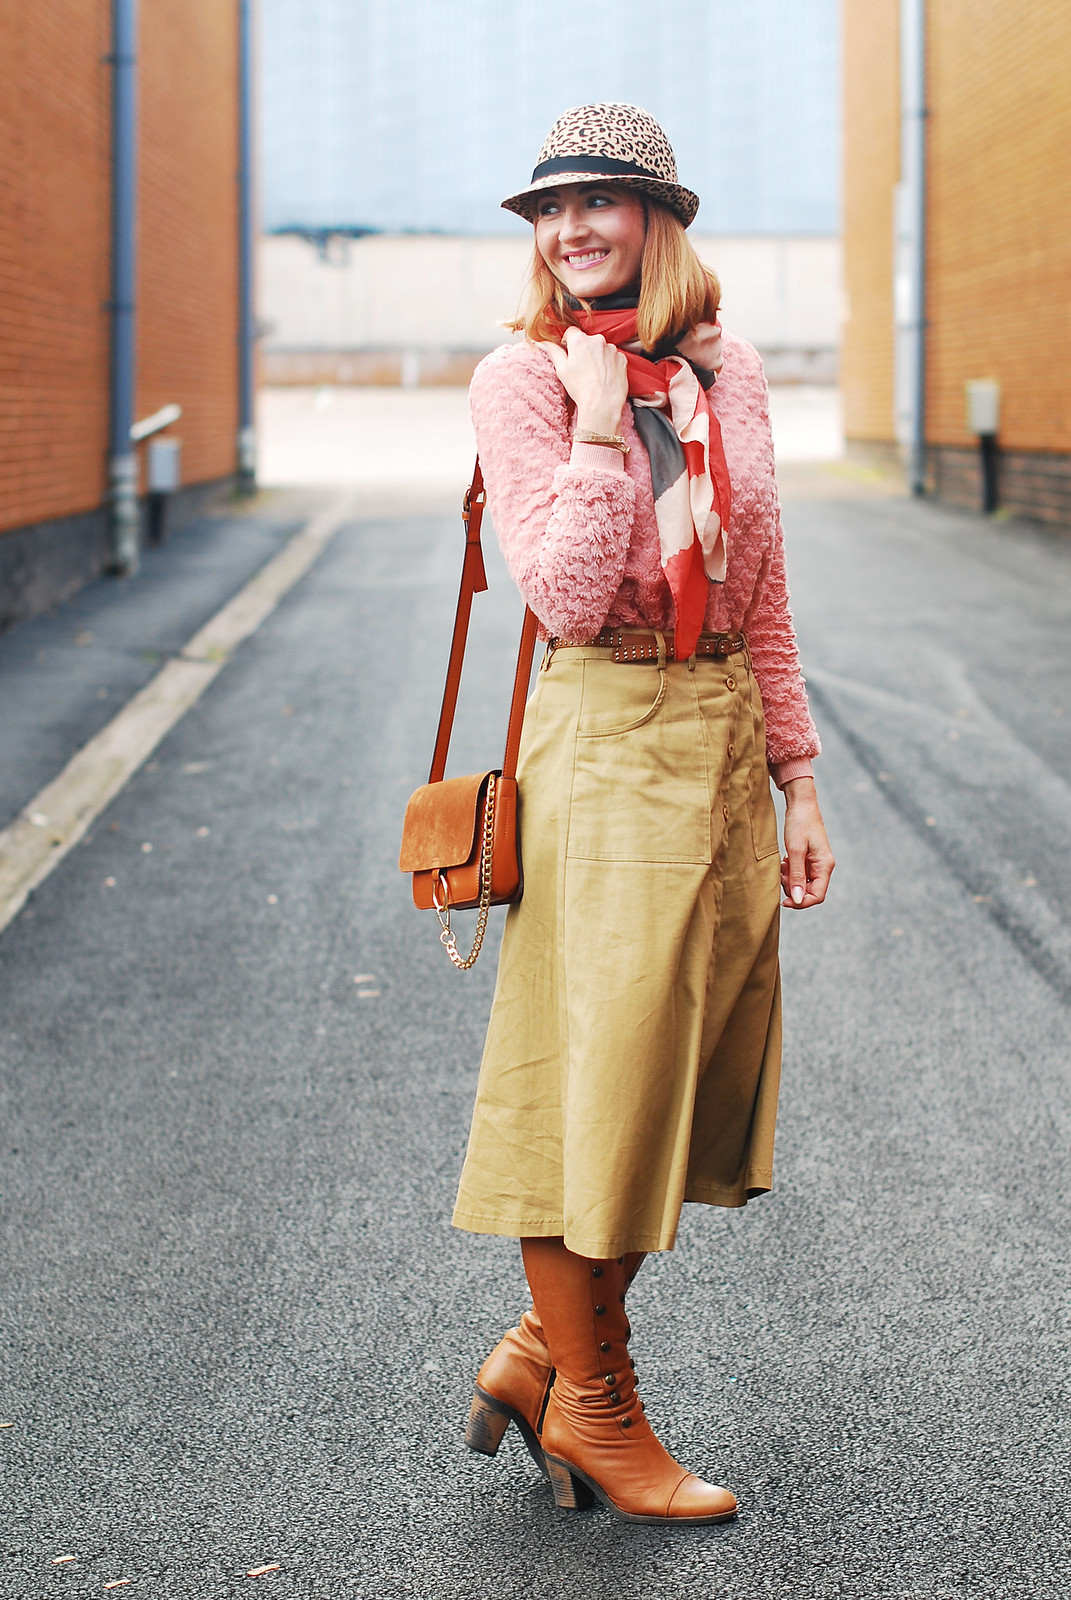 Autumnal layering with multi textures and soft colours: Camel midi skirt, pink textured sweater, tan knee boots, leopard print hat | Not Dressed As Lamb, over 40 style